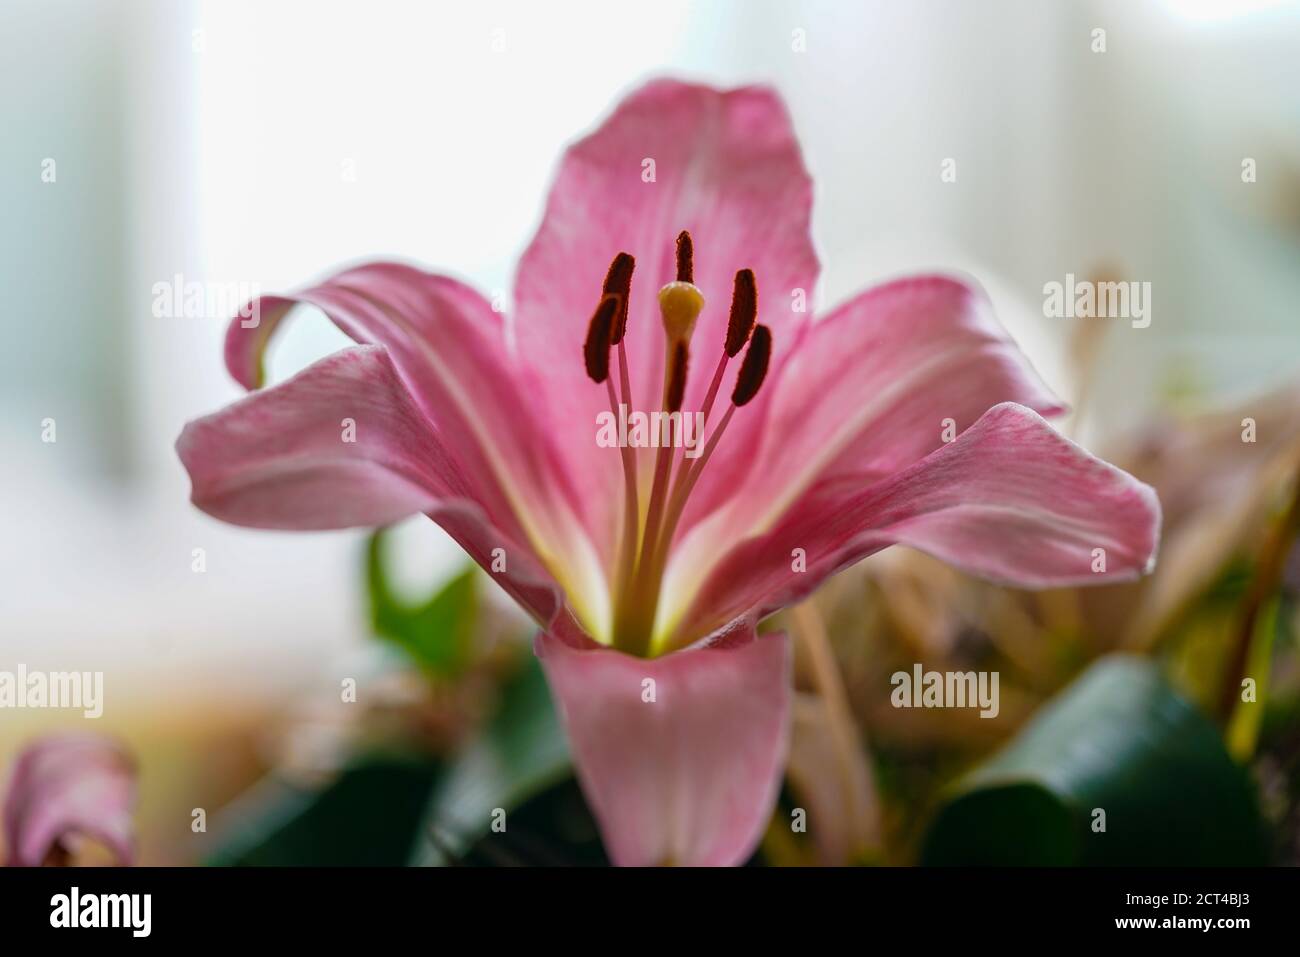 Pink Lily flower close up Stock Photo